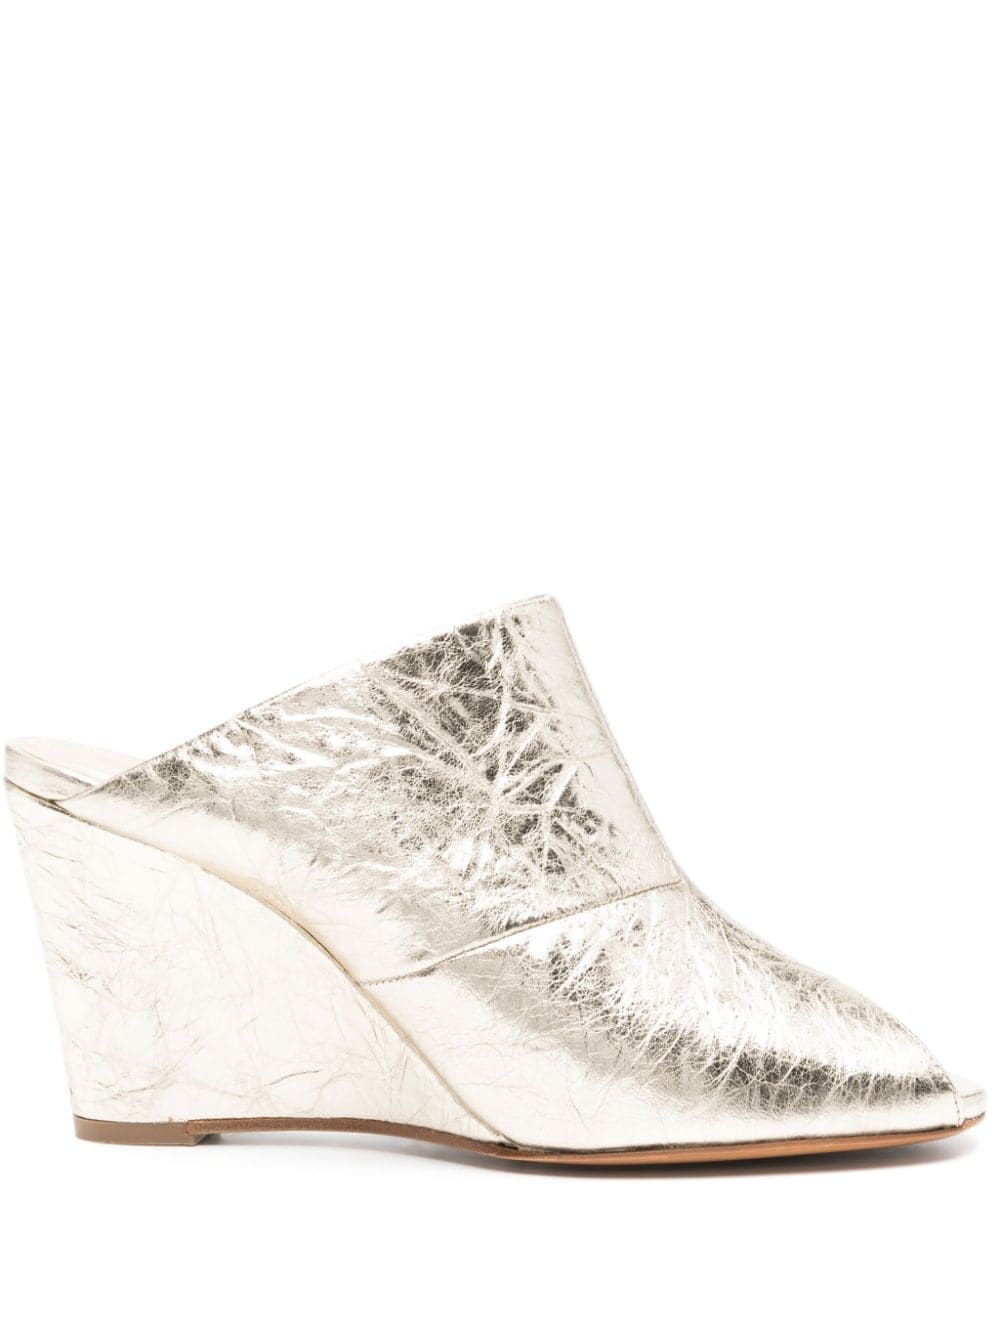 Forte Forte 95mm Leather Wedge Mules In White